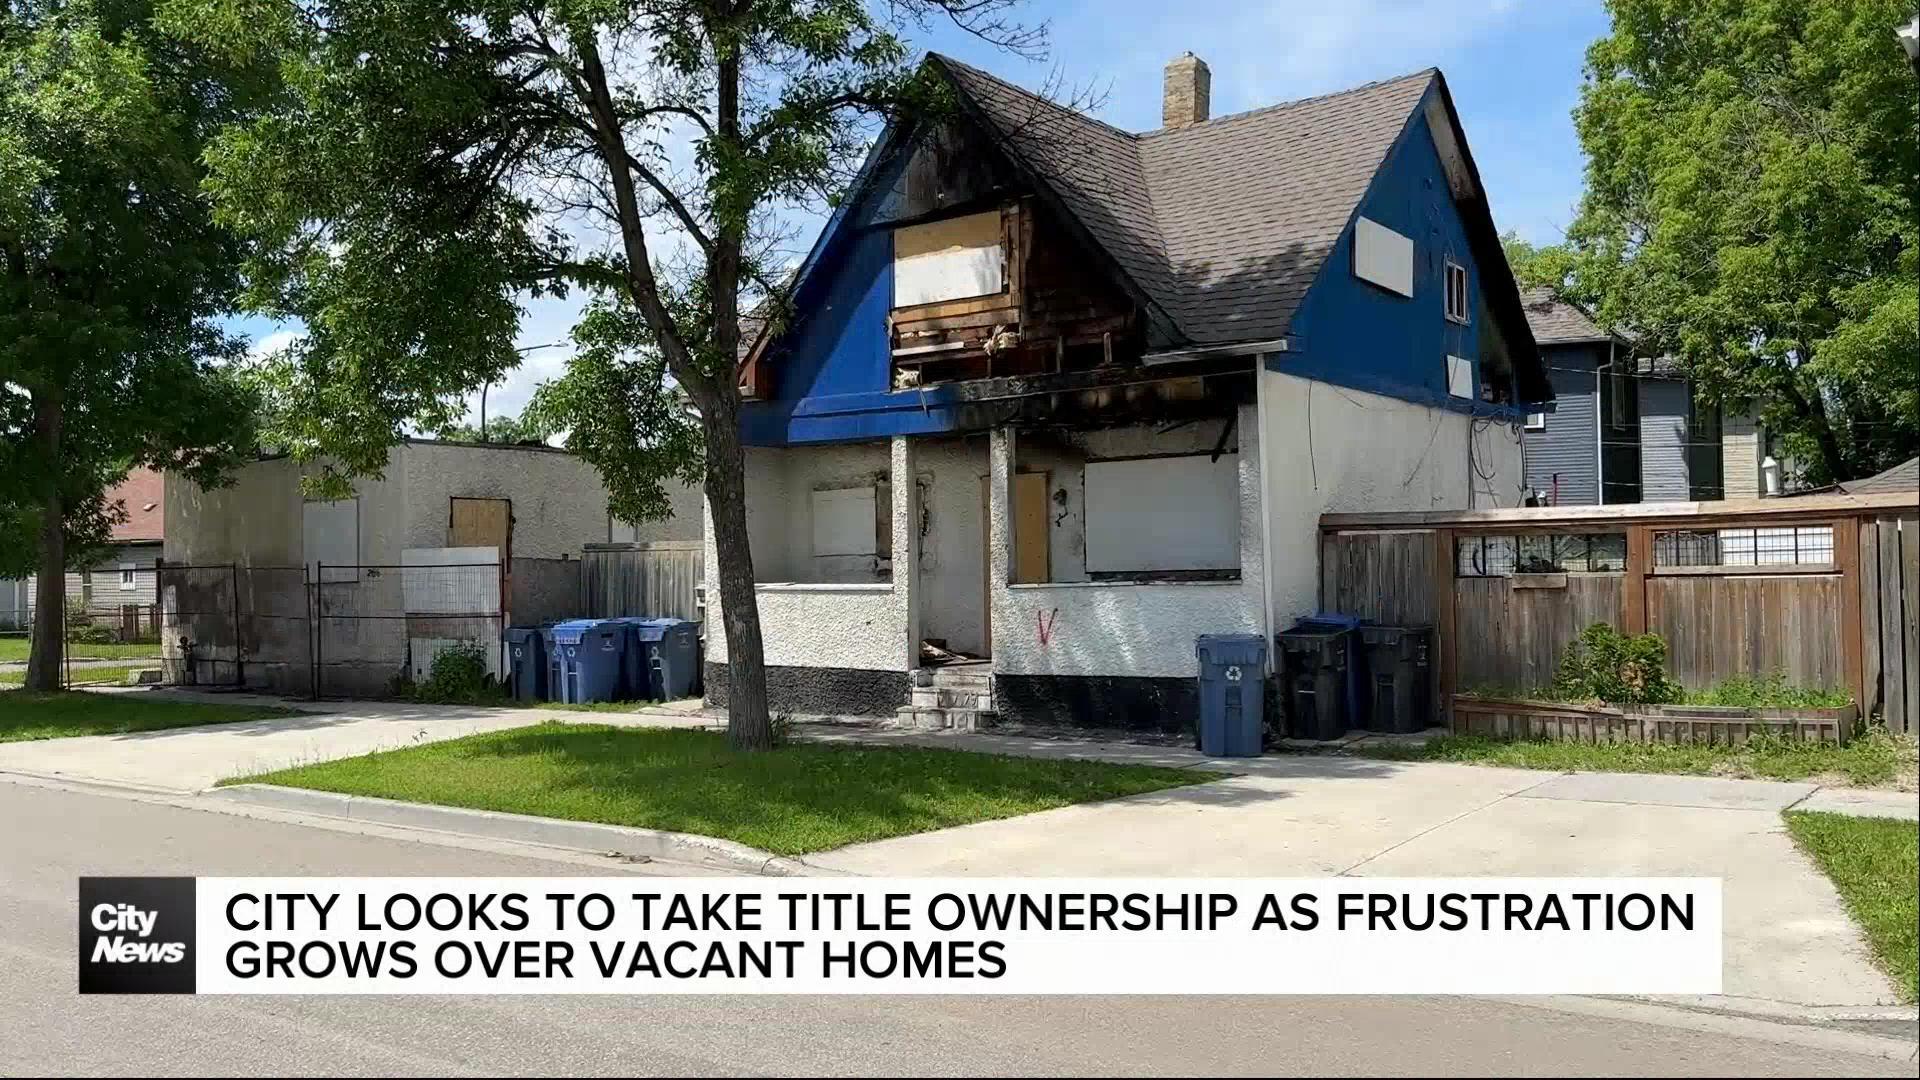 Winnipeg looks to take ownership titles as frustration grows over vacant homes